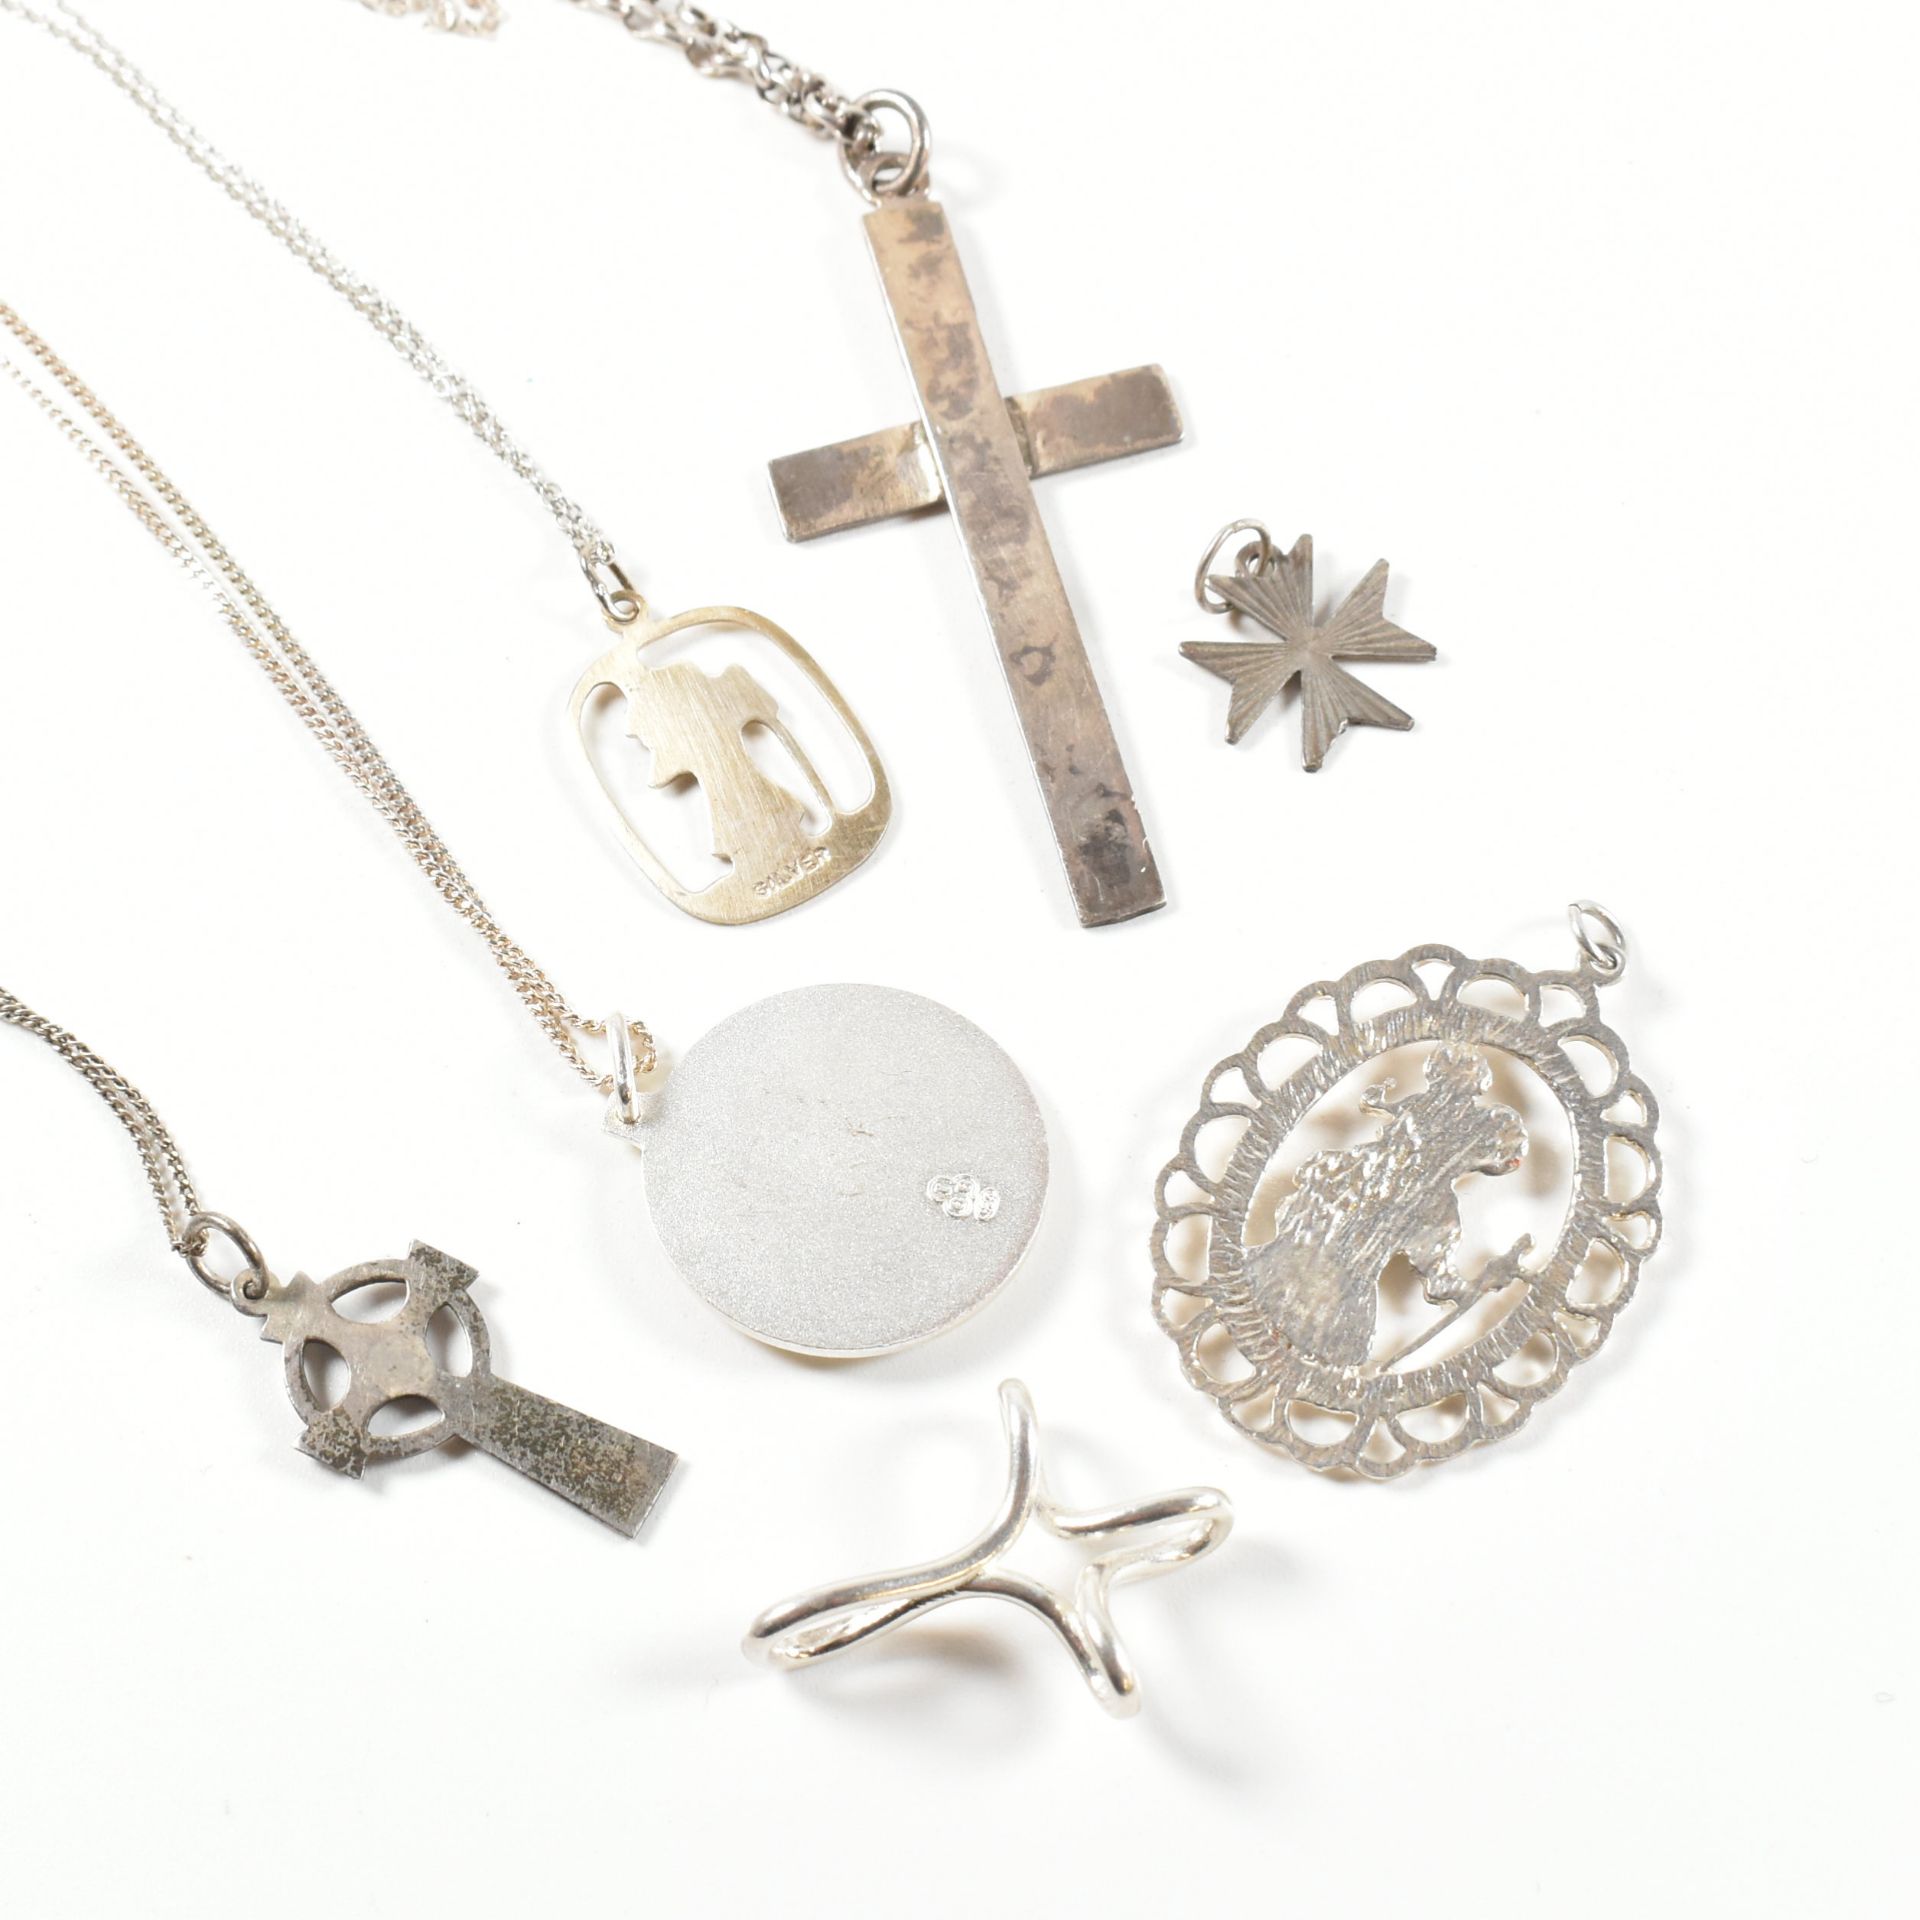 COLLECTION OF SILVER RELIGIOUS PENDANT NECKLACES & NECKLACE PENDANTS - Image 4 of 6